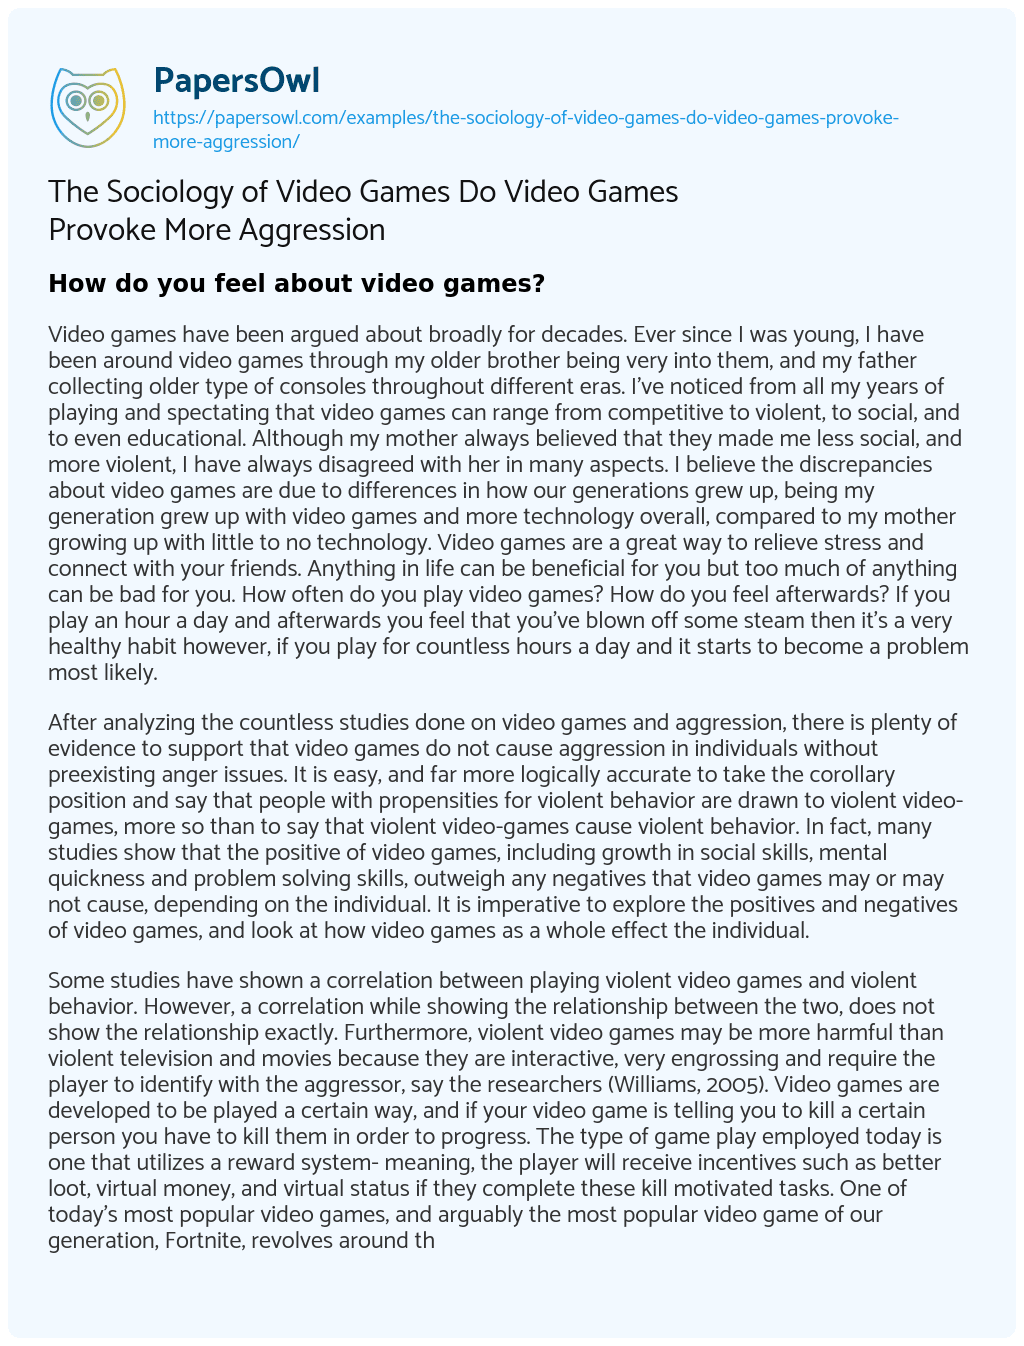 The Sociology of Video Games do Video Games Provoke more Aggression essay